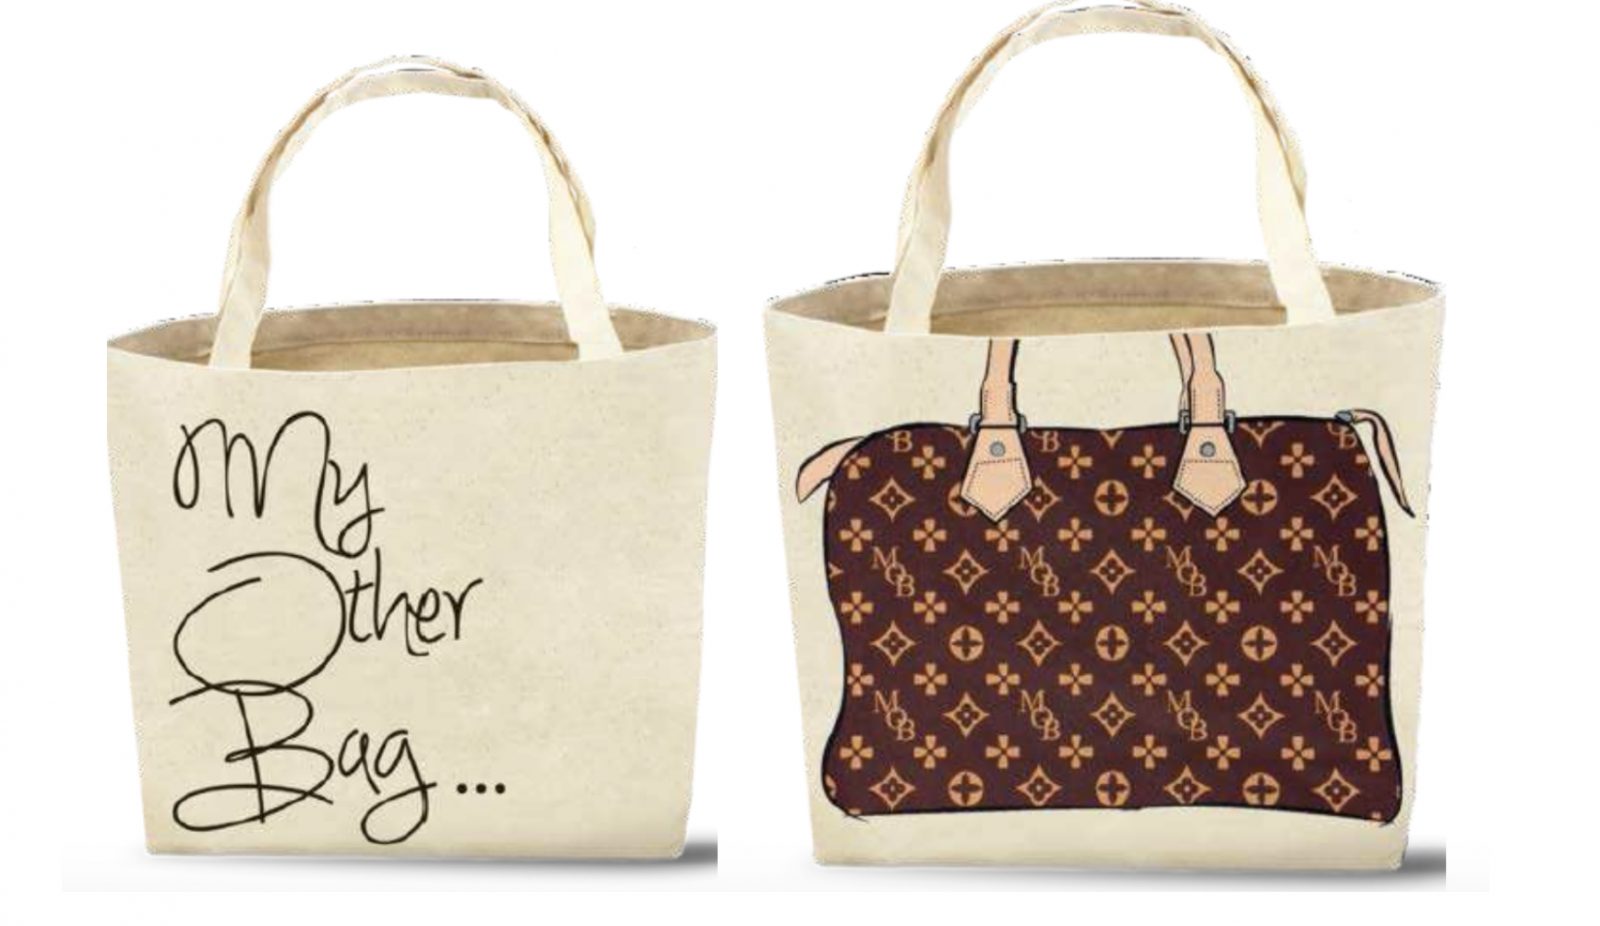 My Other Bag, Bags, My Other Bag Louis Vuitton Print Tote Bag